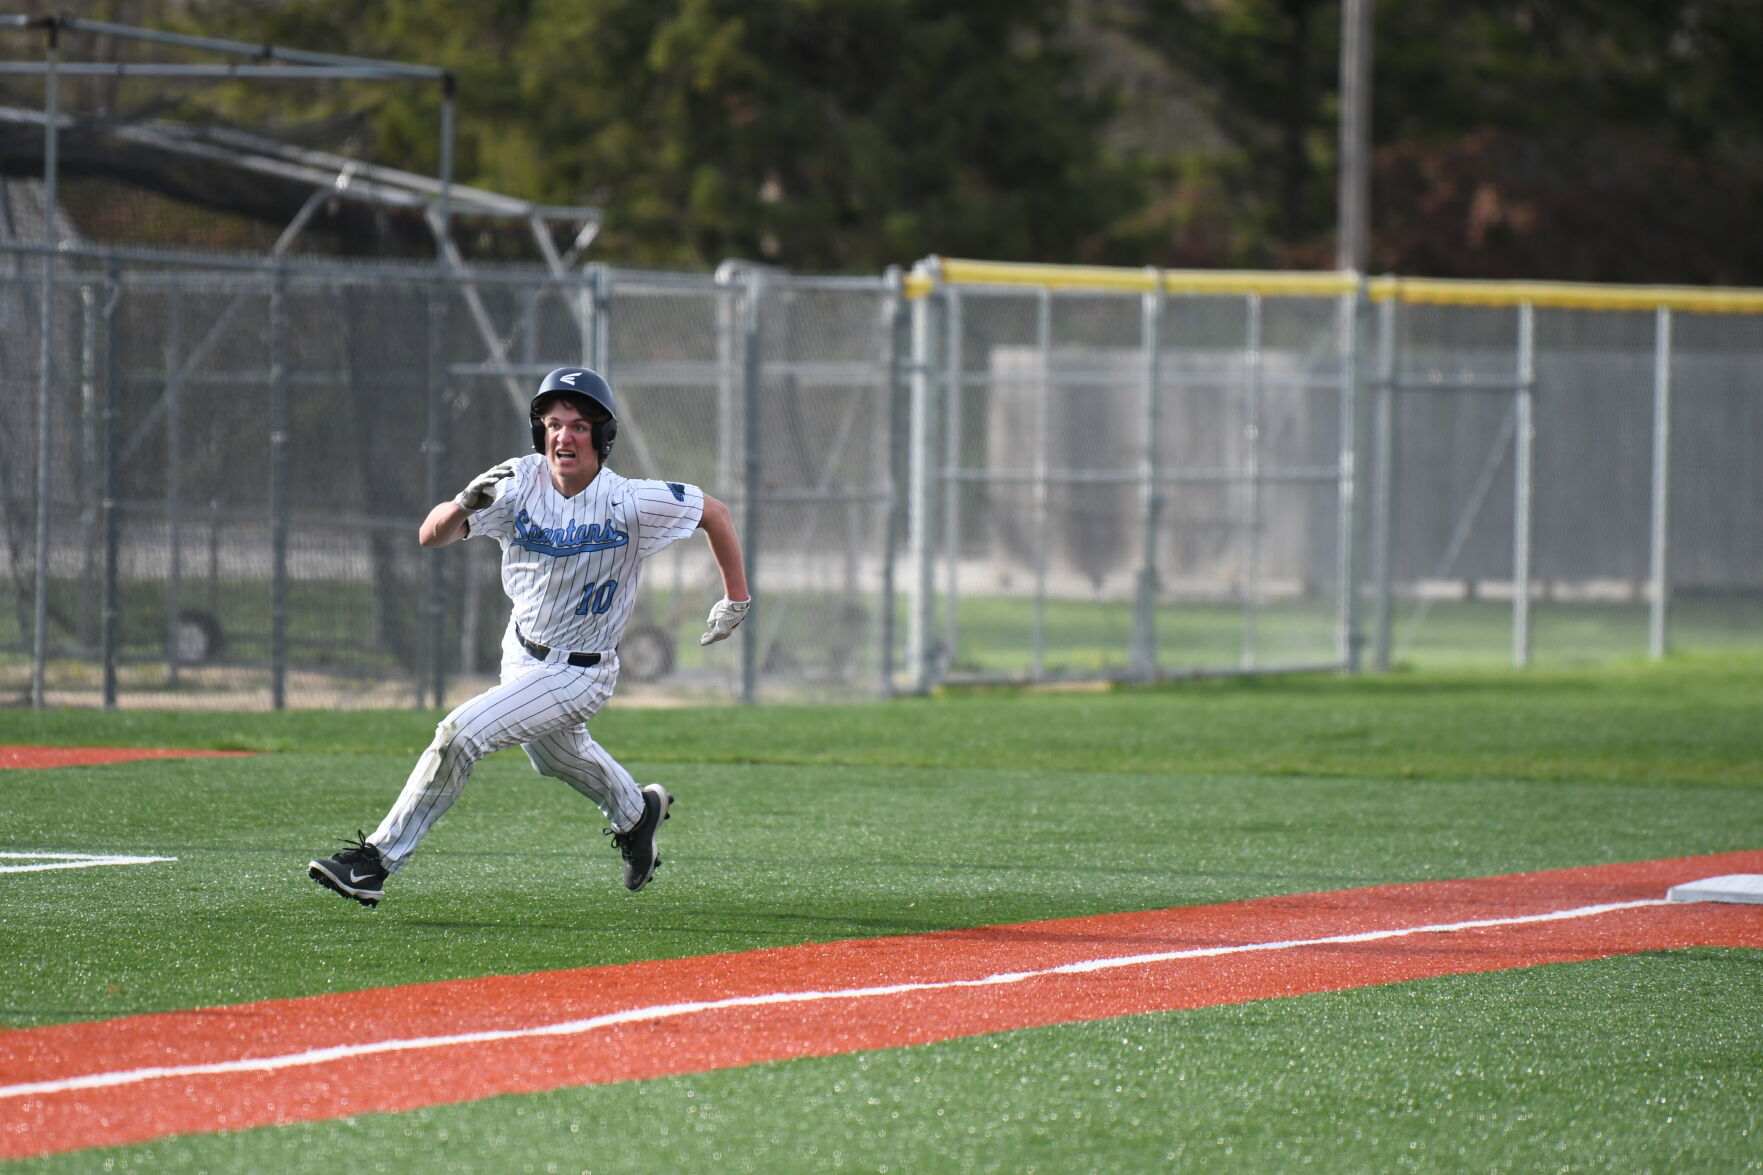 Nicolet Triumphs with 3-2 Victory Over West Bend West in North Shore Conference Baseball Clash